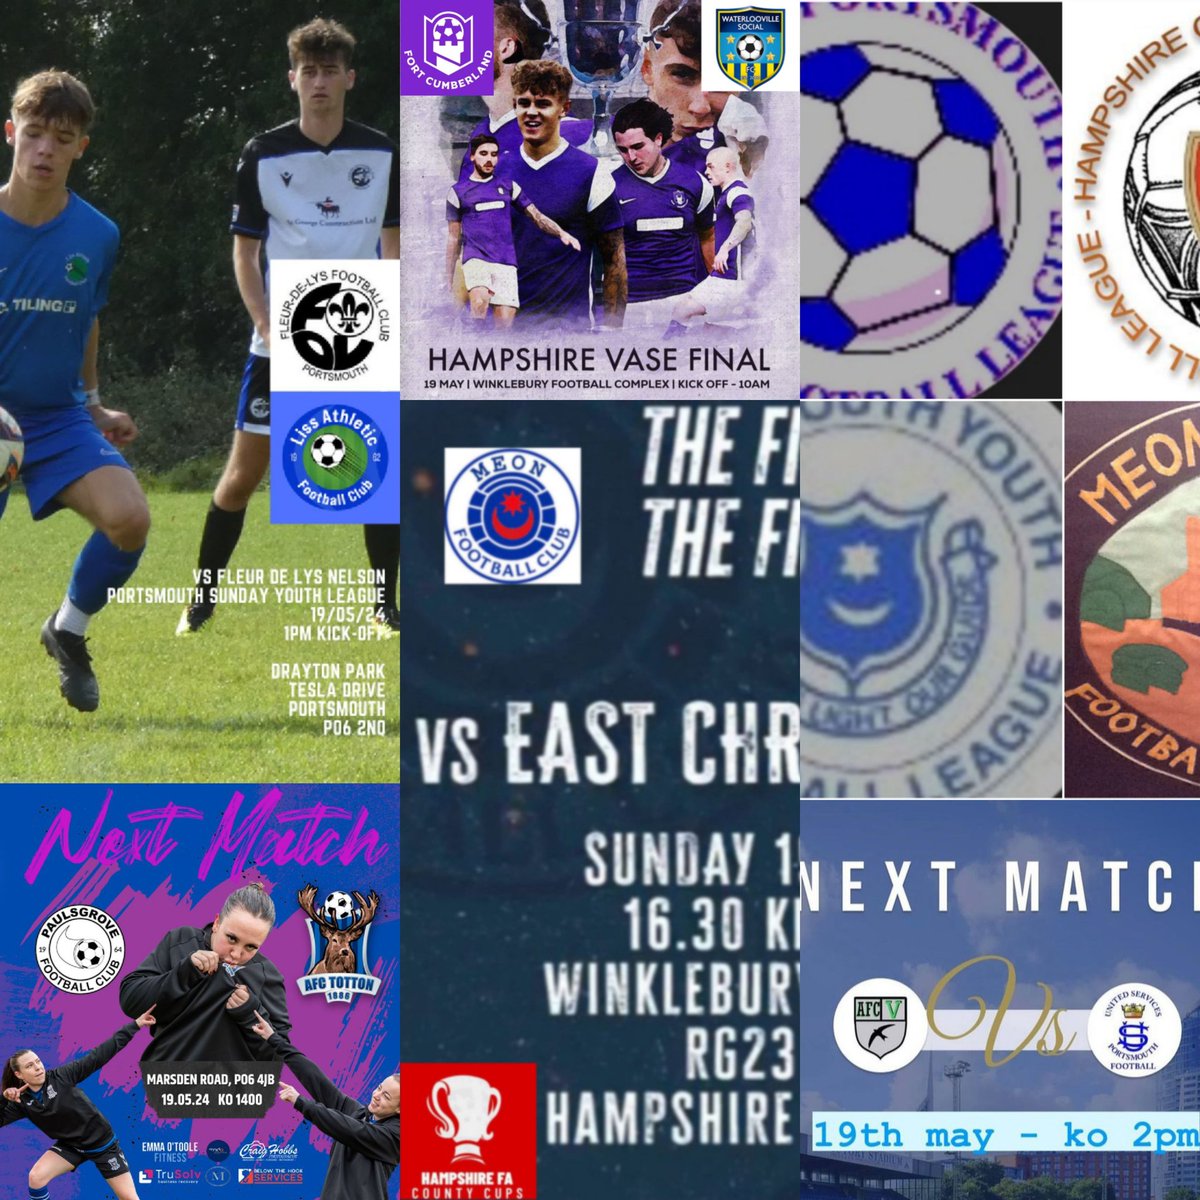 ⚽️ Sunday Matchday ⚽️
      #GreatDayAhead

@USWomenFC (a)
@PaulsgroveFC #Ladies (h)
@Fleurdelysfc1 U18 #Nelson (h)

In @HFA_CountyCups #Finals at @WinkleburyHFA it's,

@fortcumberland v @VilleSocialFC 10.0am
..and @FcMeon at 4.30pm

.. plus the @MeonFL #Vets play #allthebest 👍